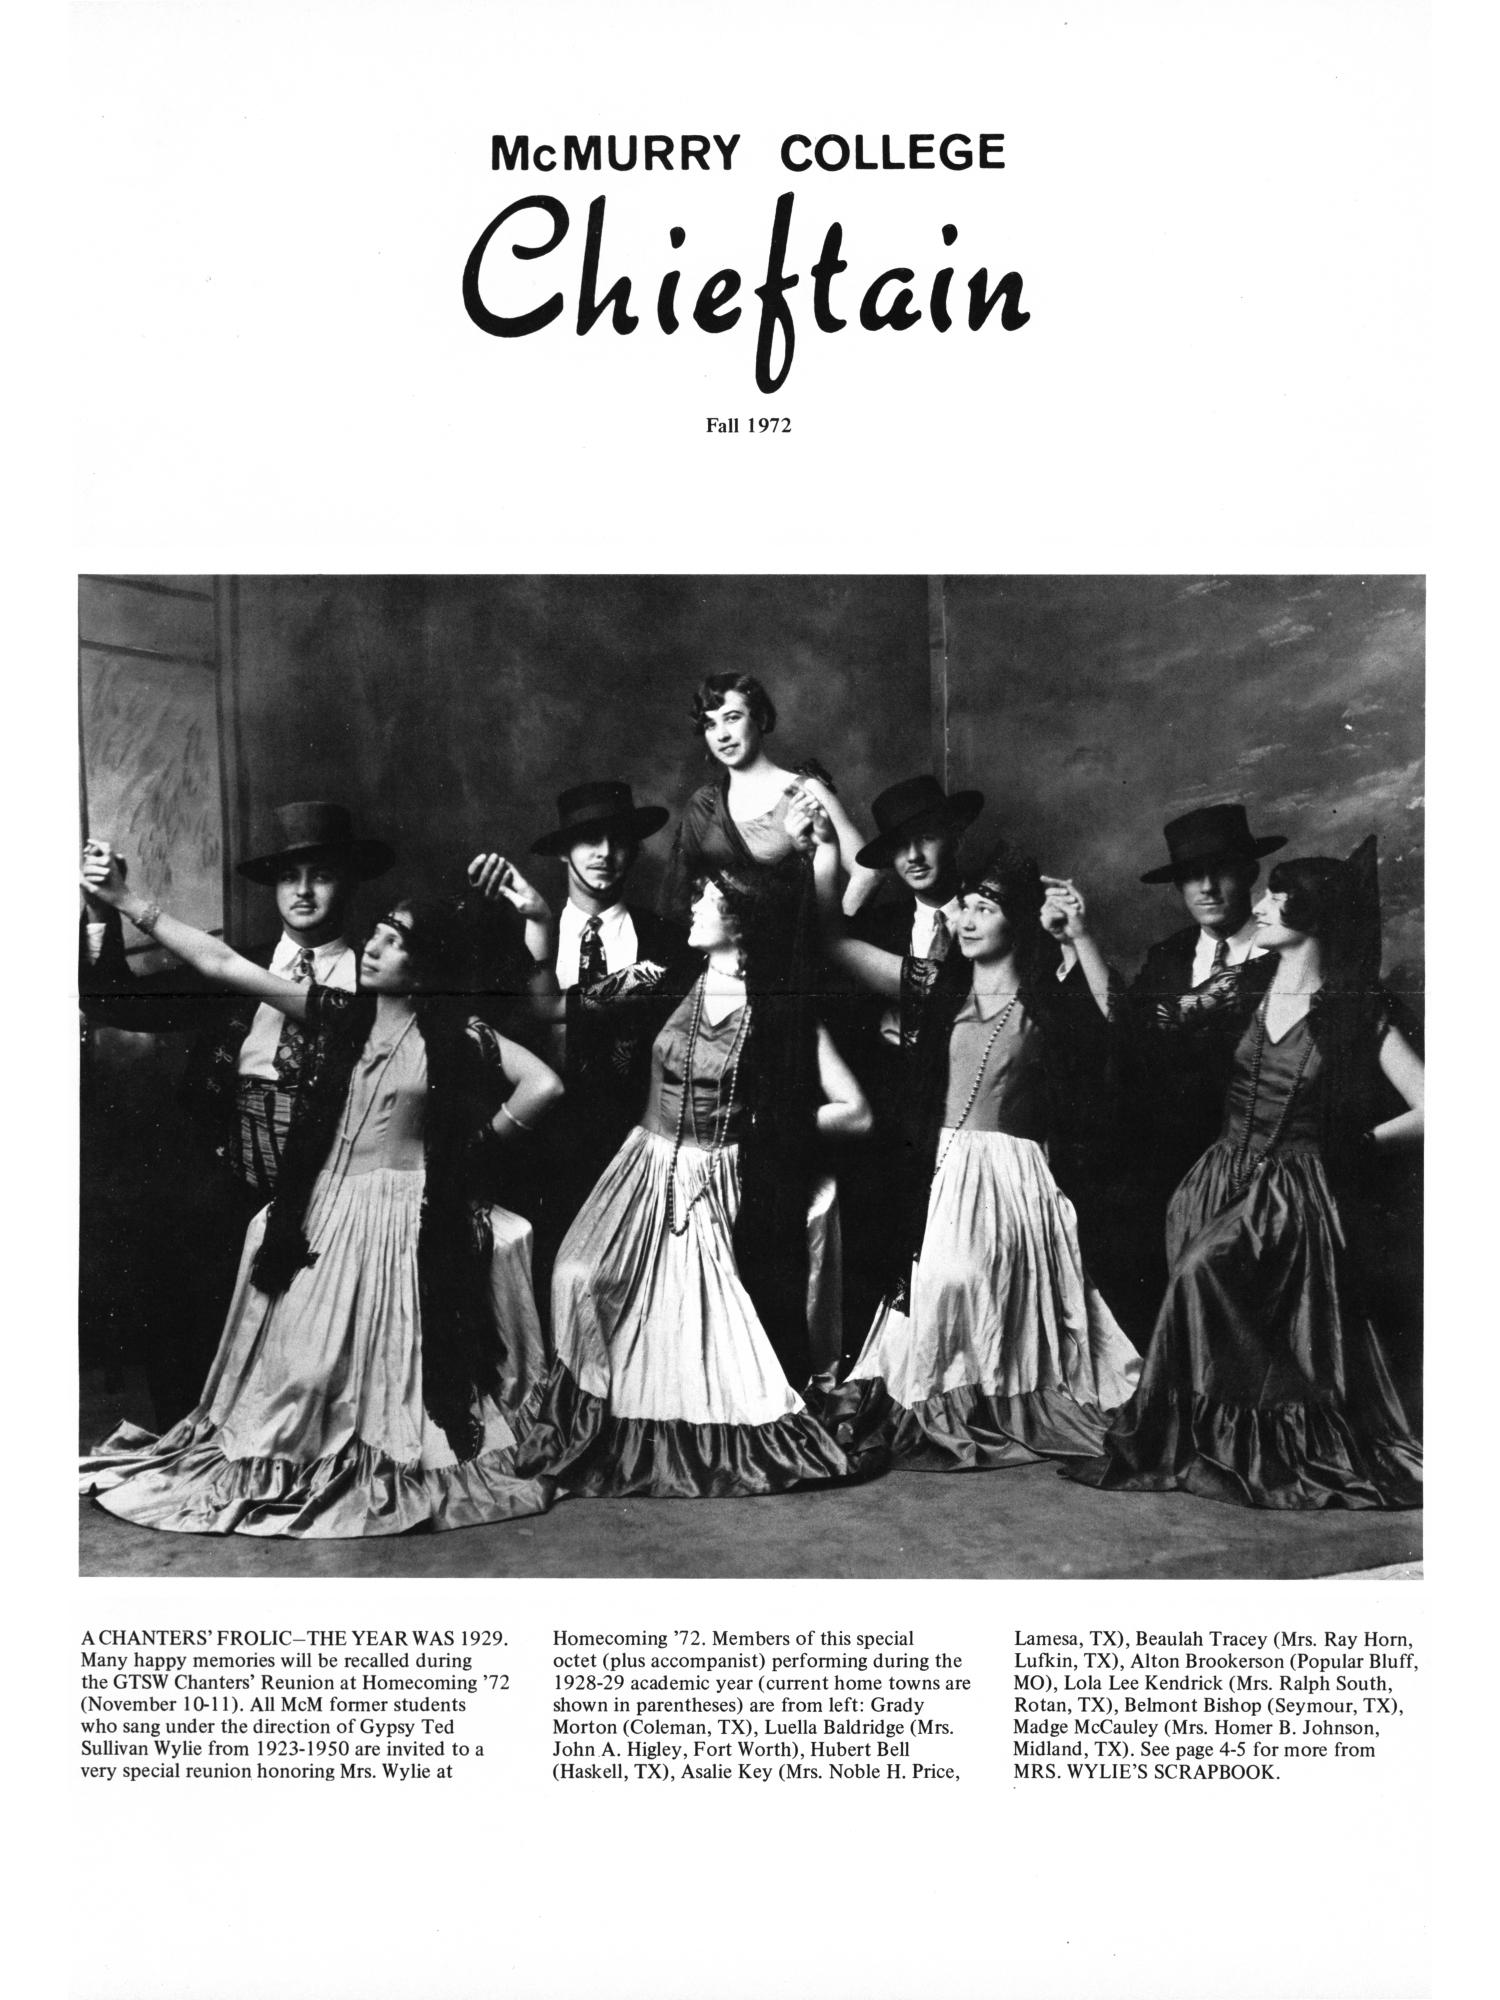 Chieftain, Volume 20, Number 3, Fall 1972
                                                
                                                    1
                                                